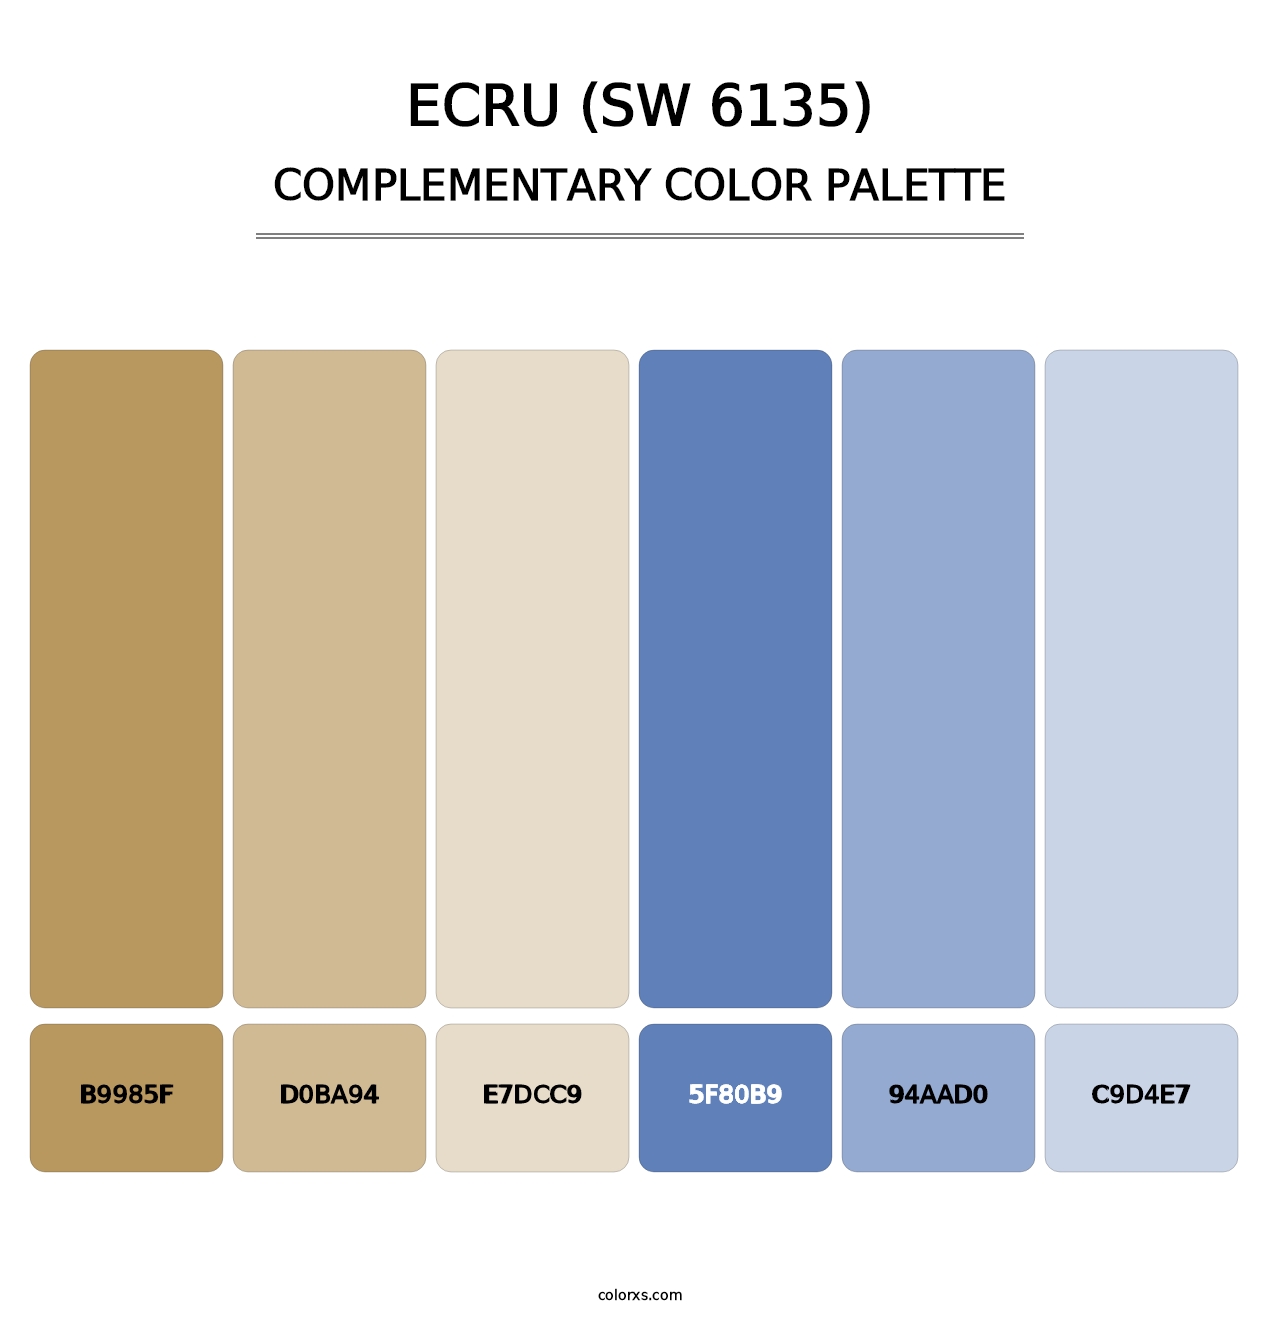 Ecru (SW 6135) - Complementary Color Palette